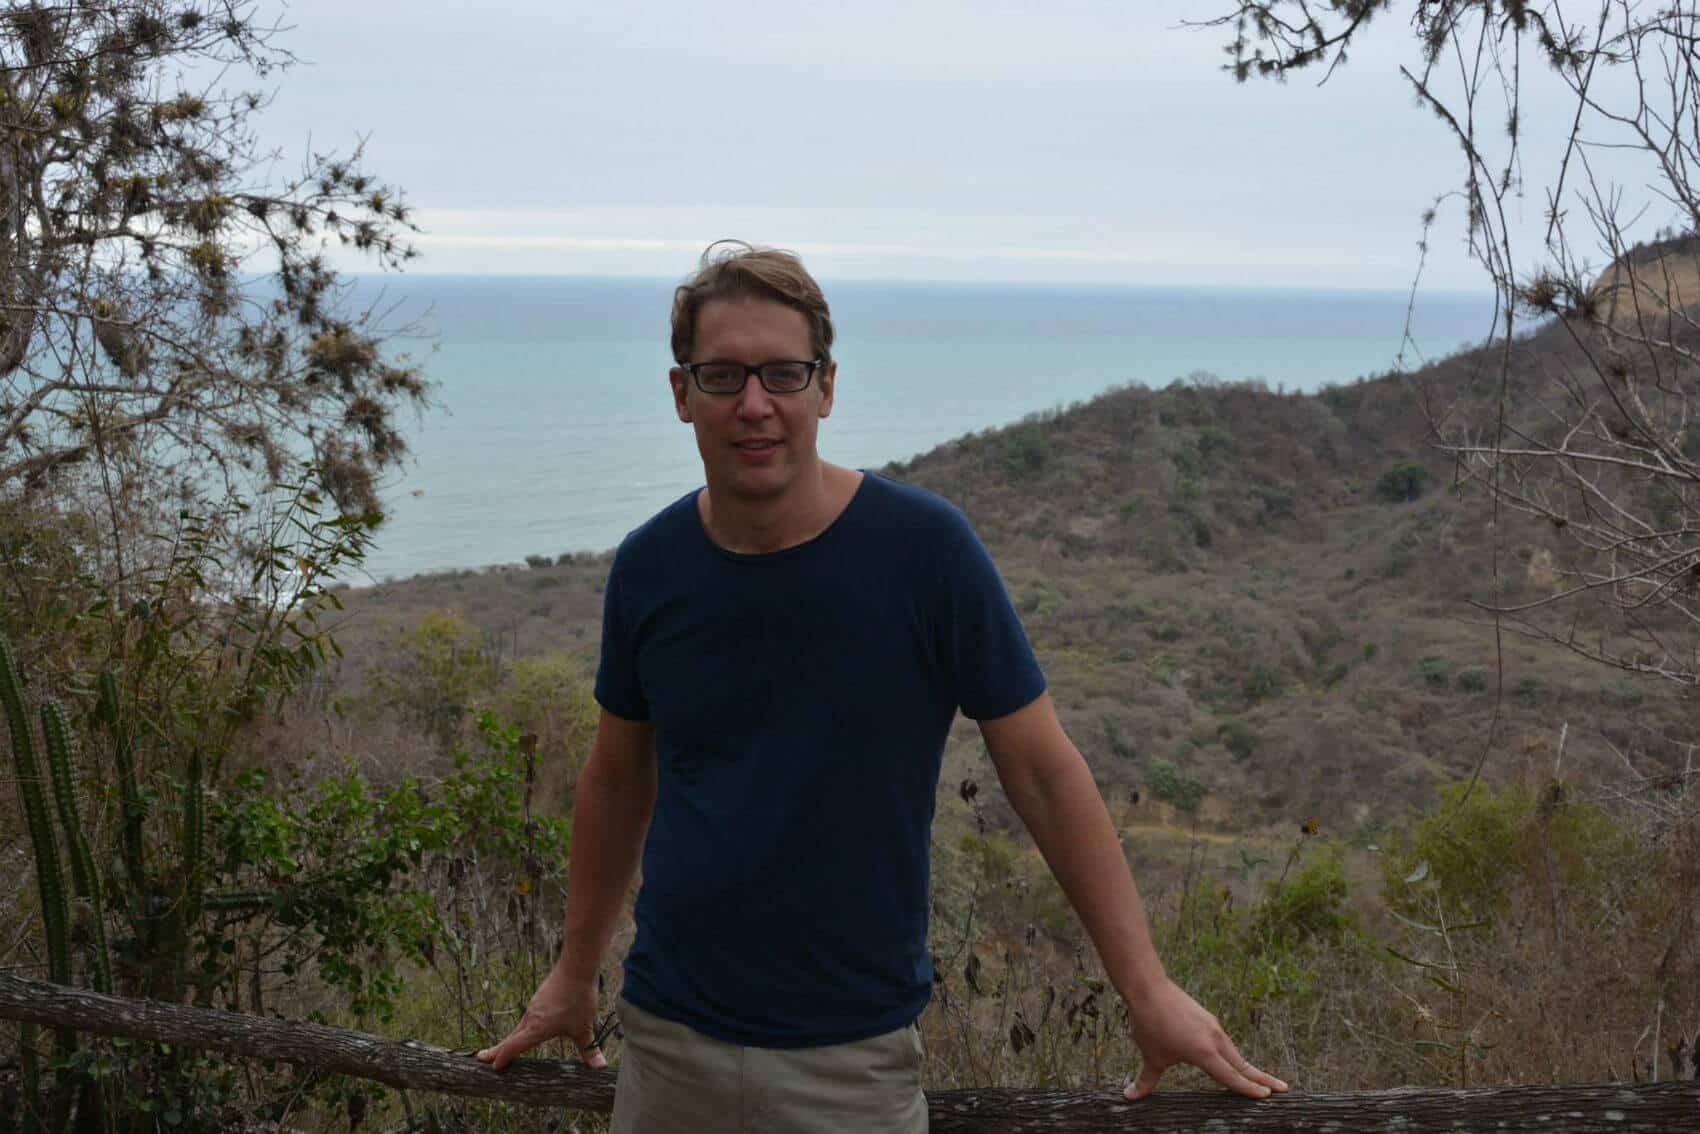 Panoramic picture of of Pontus Engstrom co-founder of the MTI investment company in a forest